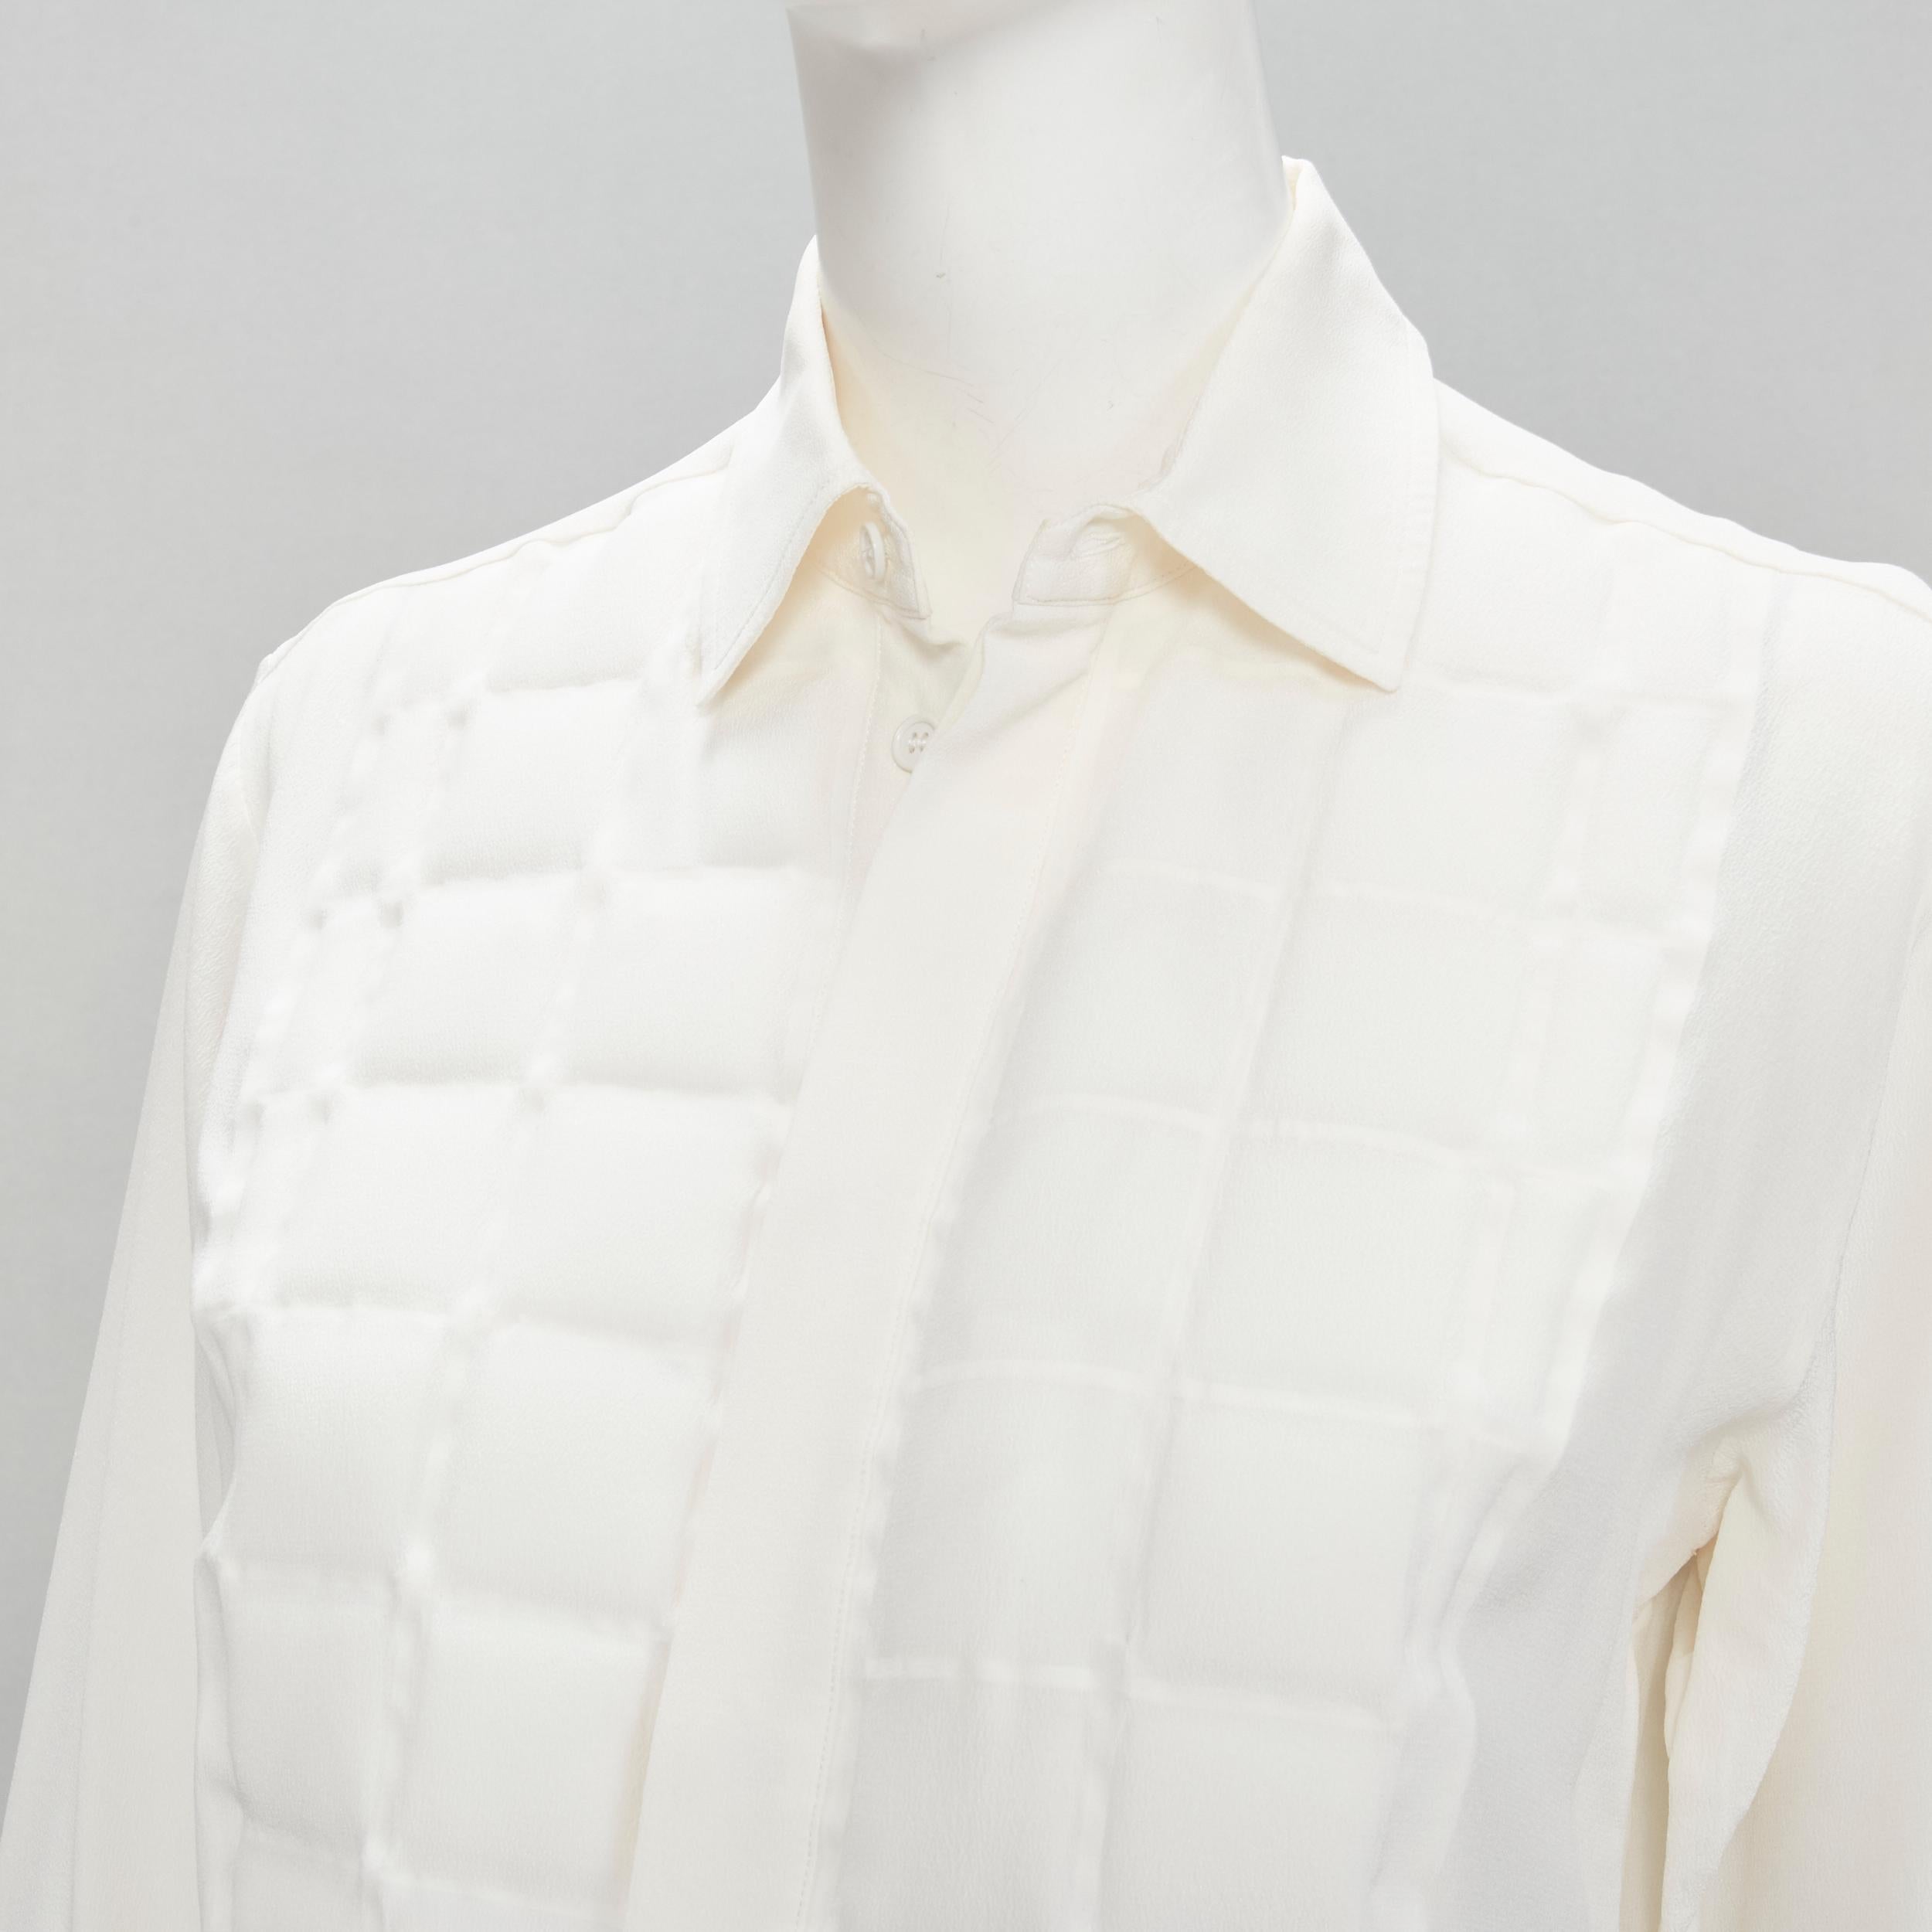 BOTTEGA VENETA 2020 100% silk quilte padded bib collar long line shirt IT38 XS
Brand: Bottega Veneta
Collection: Pre Spring 2020 
Extra Detail: Gently puffed quilting bib design. Concealed button front. Curved hemline.

CONDITION:
Condition: